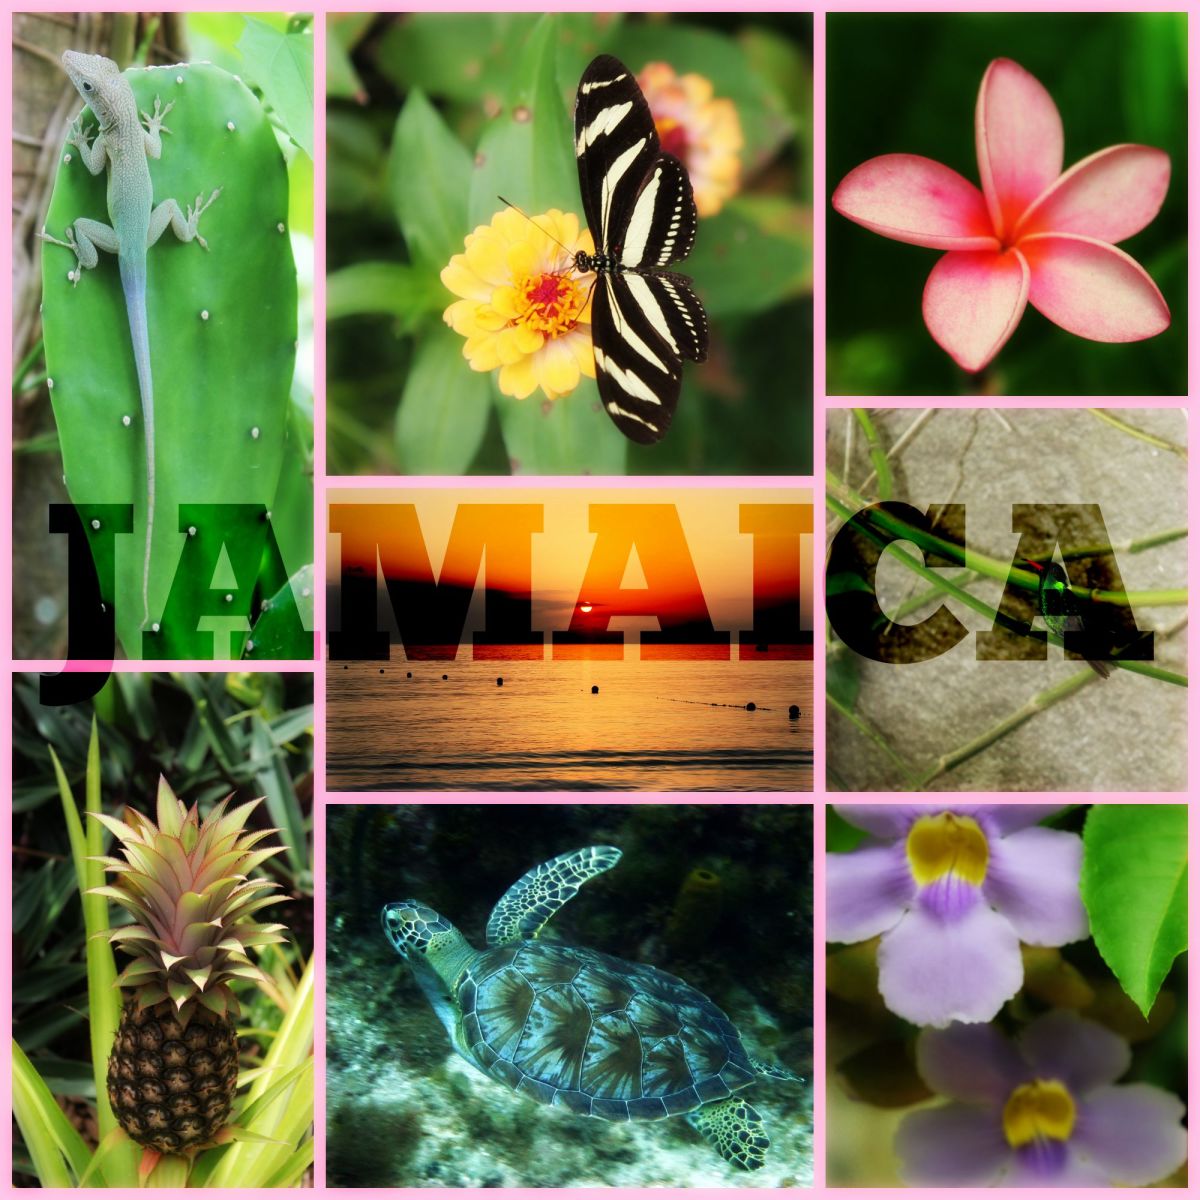 I created this nature collage after a trip to Jamaica. I didn't use a lot of "tricks,"  just a simple Square Deal layout and light pink background. Effects: Orton. Text: Chunk Five. Blend mode: Overlay.